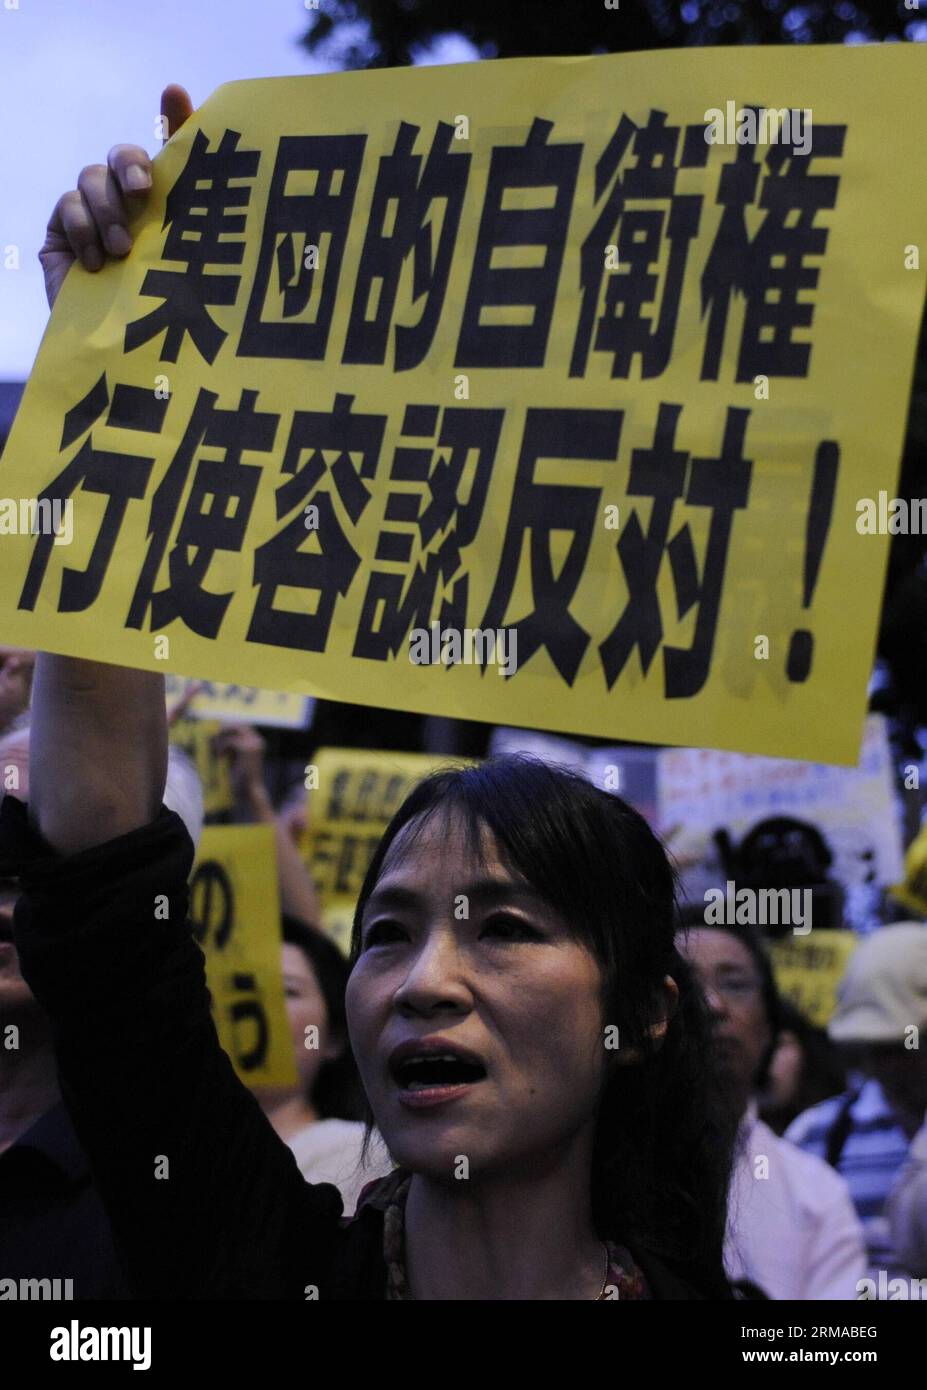 (140630) -- TOKYO, June 30, 2014 (Xinhua) -- A woman protests against the rights for collective self-defense in front of the Japanese Prime Minister s official residence in Tokyo, Japan, June 30, 2014. The Japanese government sought to get a green light from the Cabinet on July 1 for a resolution that will allow Japan to exercise collective self-defense rights through reinterpreting the country s pacifist Constitution. (Xinhua/Stringer) JAPAN-TOKYO-COLLECTIVE DEFENSE PUBLICATIONxNOTxINxCHN   Tokyo June 30 2014 XINHUA a Woman Protest against The Rights for Collective Self Defense in Front of Th Stock Photo